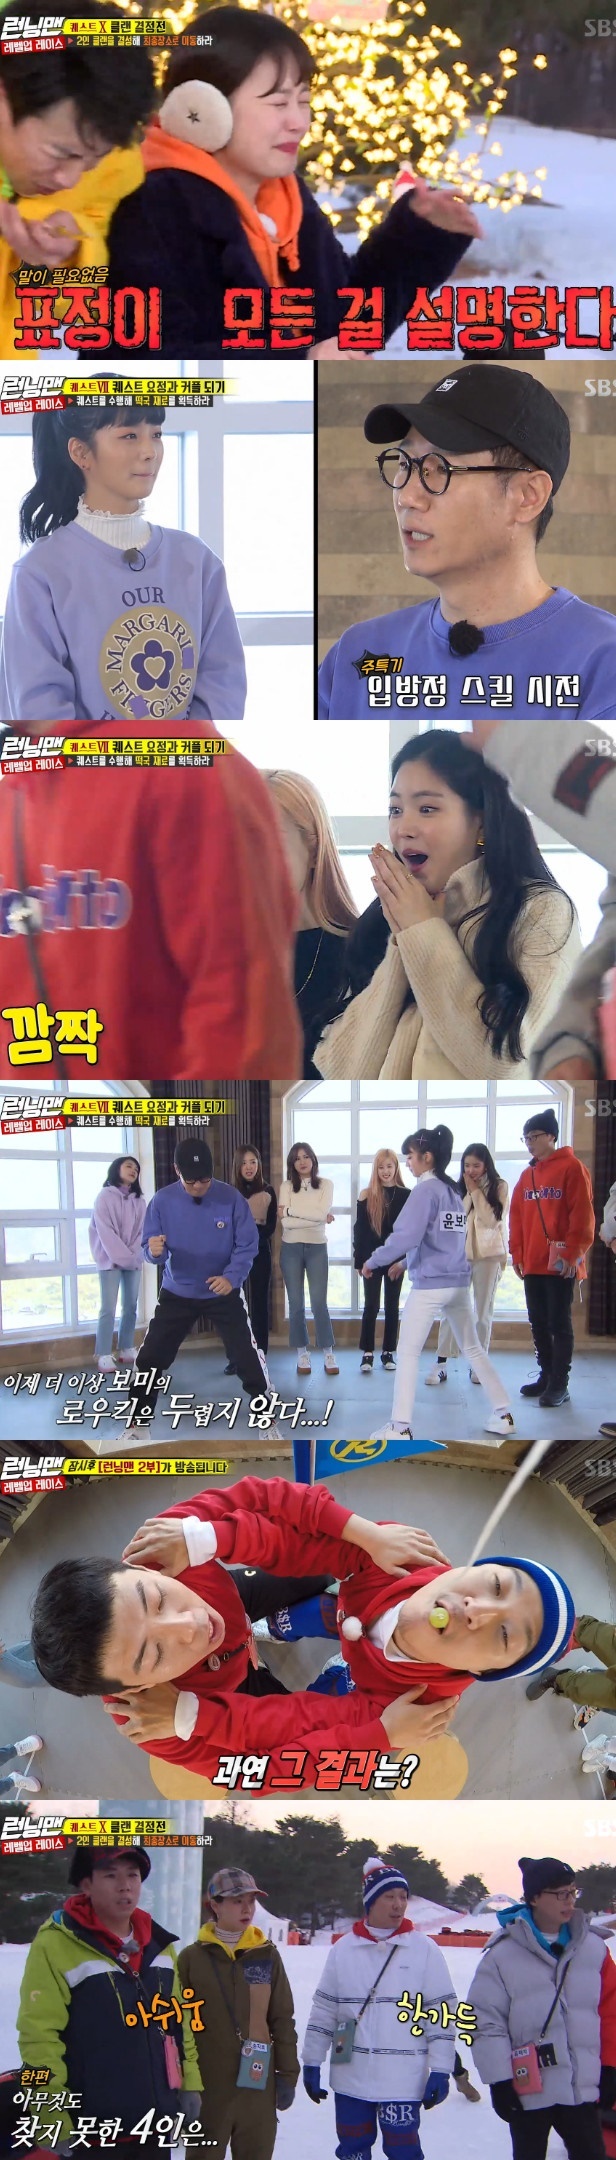 Seoul = = New Years first Mission bottom with Apink was Yo Jae-Suk Haha Yang Se-chan.SBS Running Man, which was broadcast on the afternoon of the 6th, will be decorated with a new project for the first broadcast in 2019, and Apink was a guest.On this day, the members had to receive the Mission of boiling rice cake soup together, select the material, and find out where the material was.To know the location of the material, they had to play a tube throw game with their hips and pass the sum distance of 10 meters.However, Yoo Jae-Suk Jeon So-min Ji Suk-jin, who showed silver hell in toxic Hong Kong, continued to fail and laughed.Ji Suk-jin finally managed to play after three challenges after being leveled down.The hint was that Tteokguk is at the end of a cold and hard road. So the members decided to select two members to come to the material.But there was an additional Mission that didnt inform the members: to take the ingredients to be with the members, to eat rice cake soup and choose to level up alone.Lee Kwang-soo Jeon So-min ate rice cake soup as soon as the question was over and leveled up only two.But I get a lot of guilt, how do I solve this guilt as usual, said Jean So-min, as she turned around.However, Lee Kwang-soo said, If you talk honestly, you will not feel guilty.The fourth quest, Eat snacks with relays in 100 seconds Mission, teamed up with Apink to resolve the Mission.Then, You and My Hood Link is a game that matches the words on the head of the opponent team. Teamwork was important.Finally, I started to make rice cake soup by collecting cooking ingredients. Jeon So-min put the prepared garlic into the toe and boiled the worst rice cake soup.Meanwhile, the four who could not find anything formed a clan of two people and arrived at the final place on a sled.After the rice cake race was over, Kim Jong Kook Lee Kwang Soo Ji Suk-jin Jeon So-min was level up, and Yo Jae-Suk Haha Yang Se-chan was bottom.Race was not the end here; the crew wondered, foreshadowing that the secrets of the clans each woven by the members would continue next week.